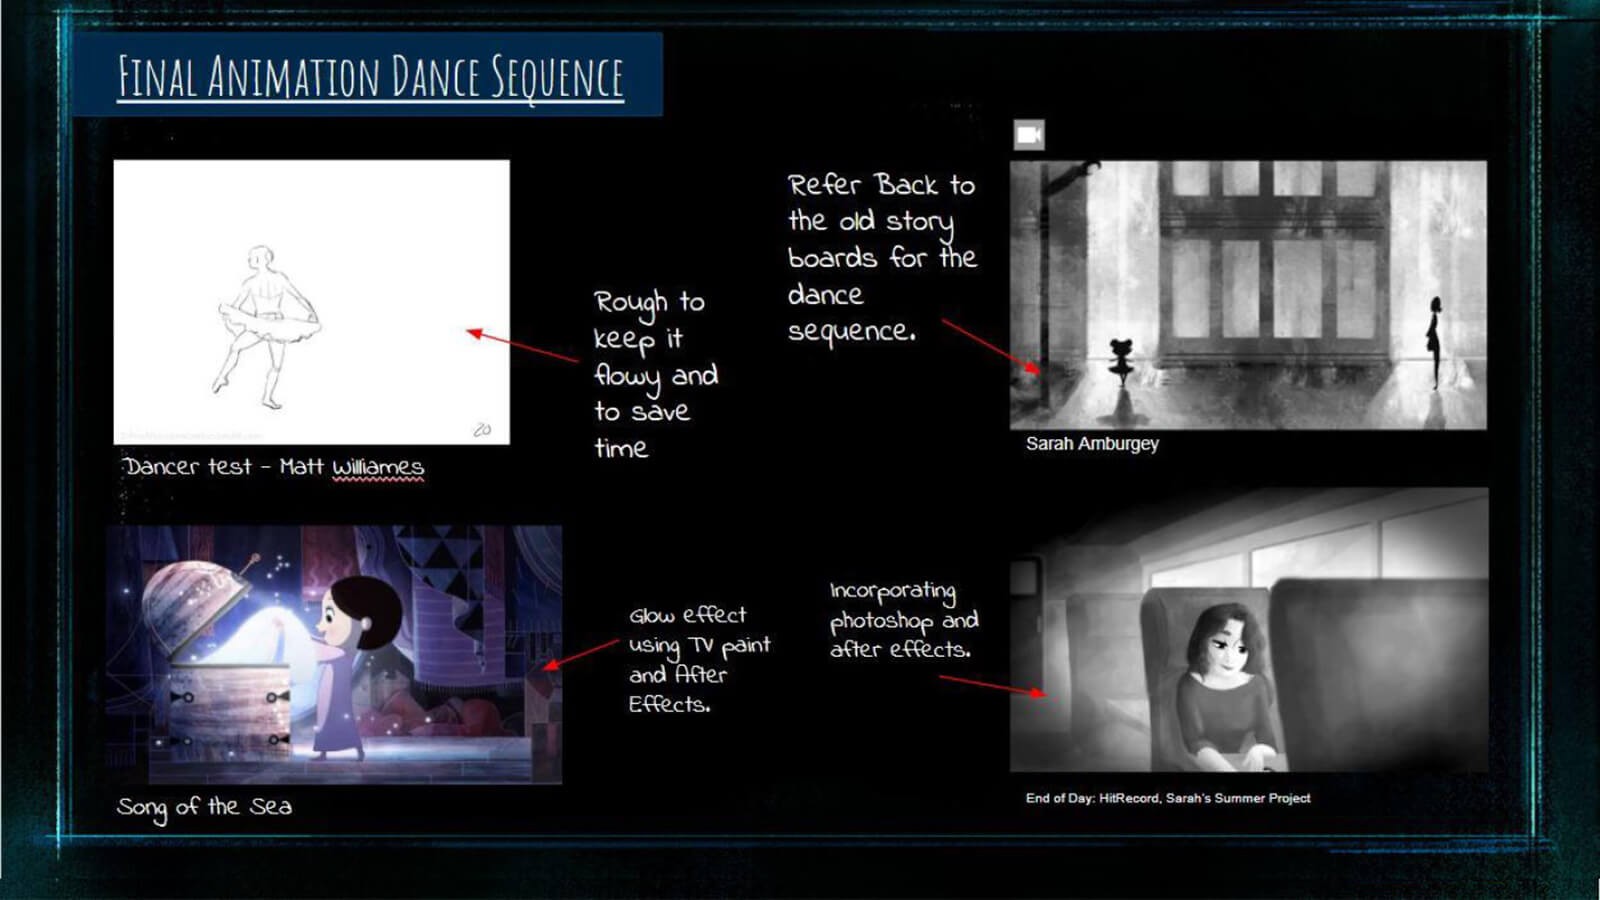 A guide to the team's approach for the film's complex animated dance sequence.